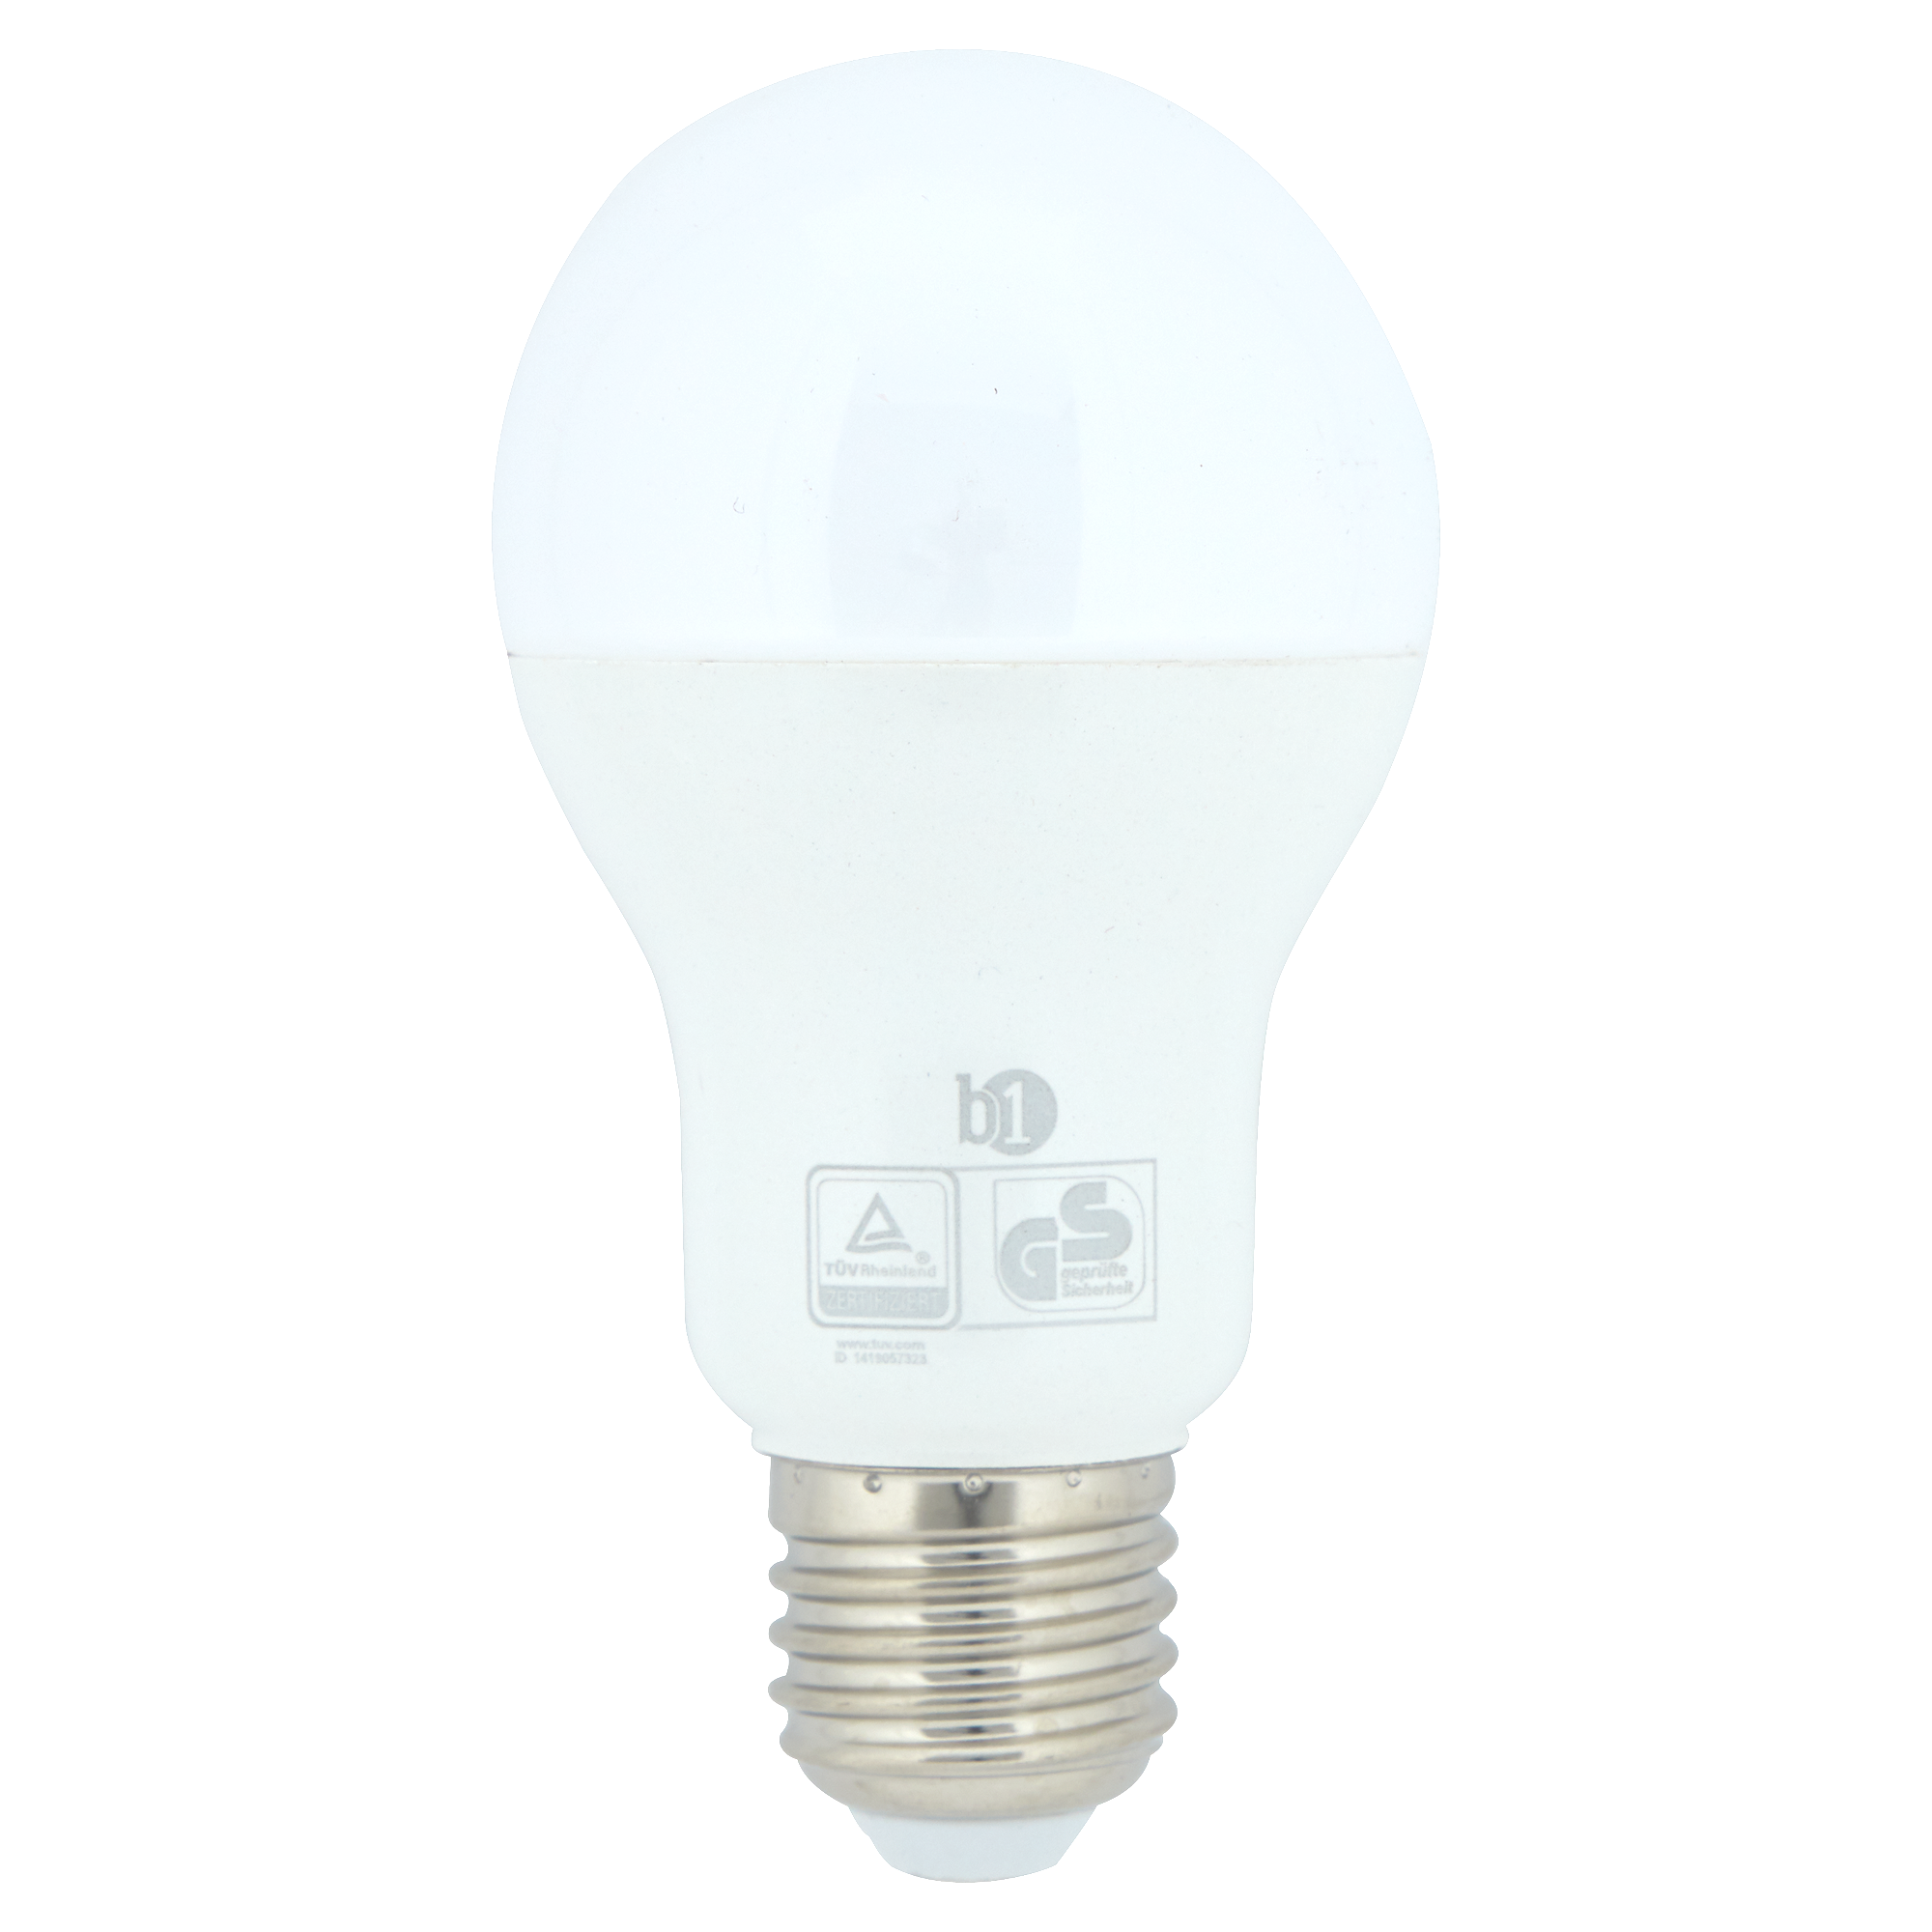 LED-Lampe E27 806 lm 9,4 W 2er-Pack + product picture